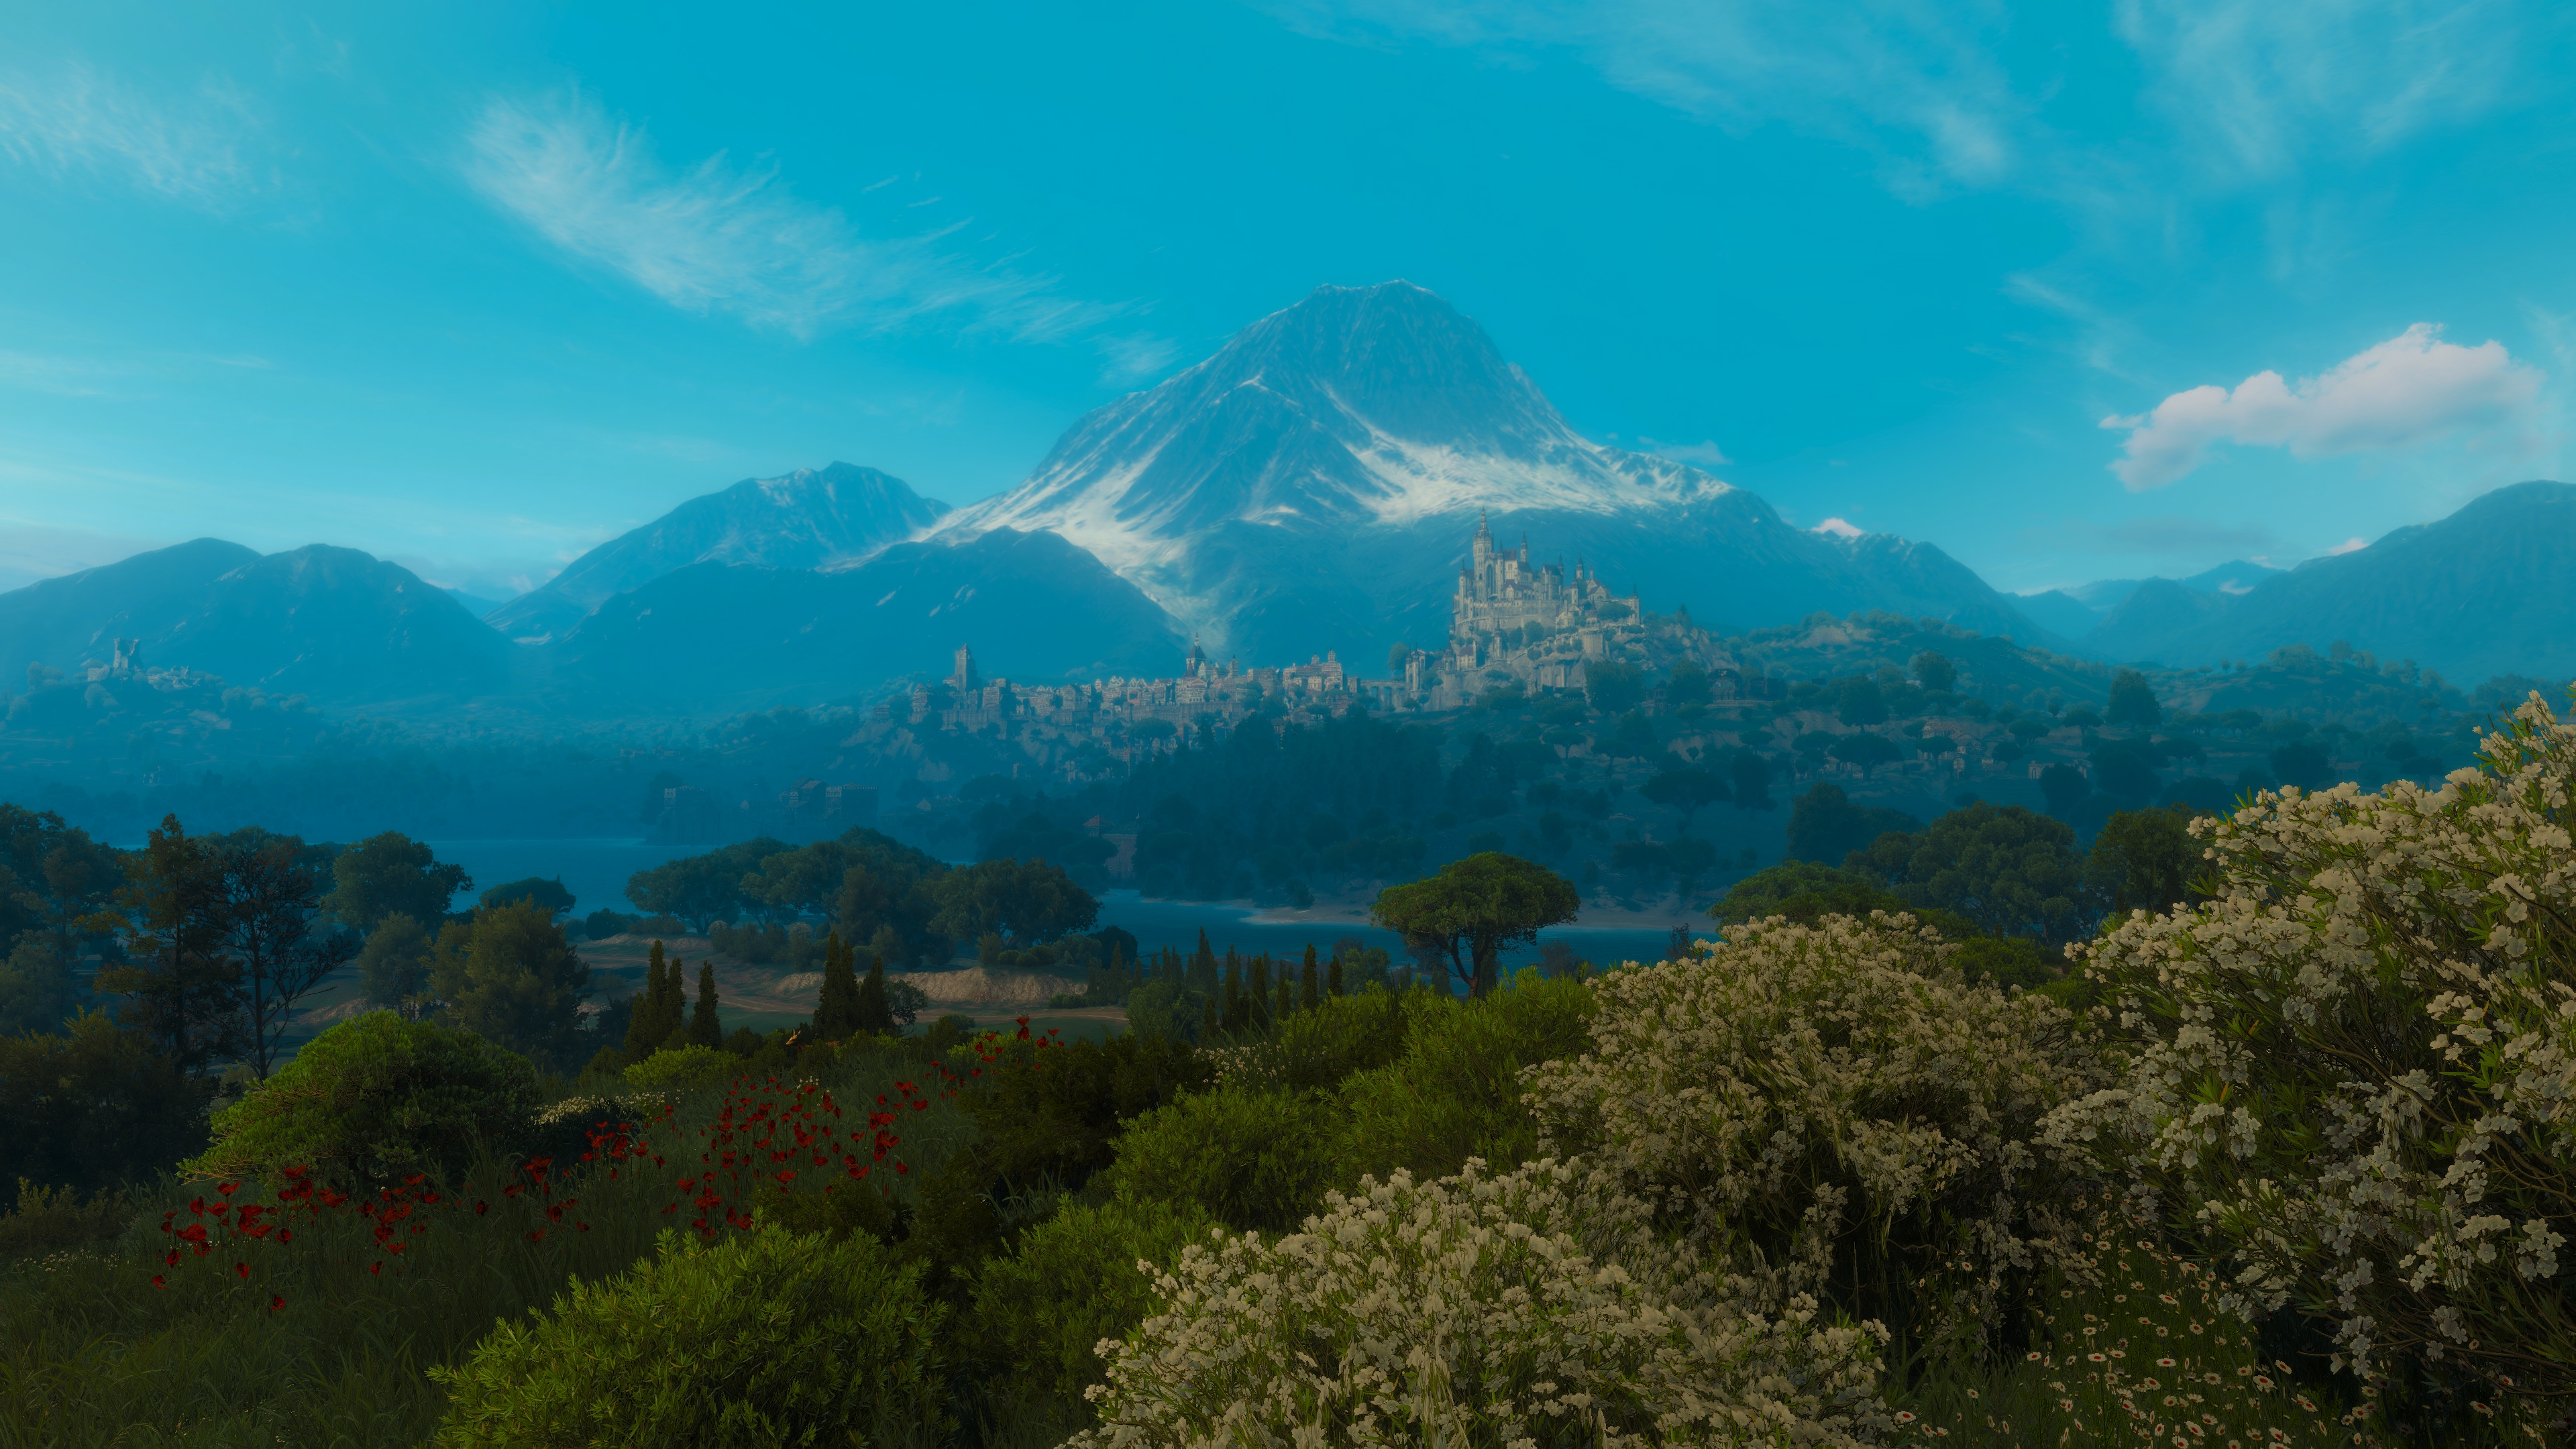 The Witcher 3 Wild Hunt Screen Shot PC Gaming Tussent Mountains Landscape The Witcher 3 Wild Hunt Bl 3840x2160